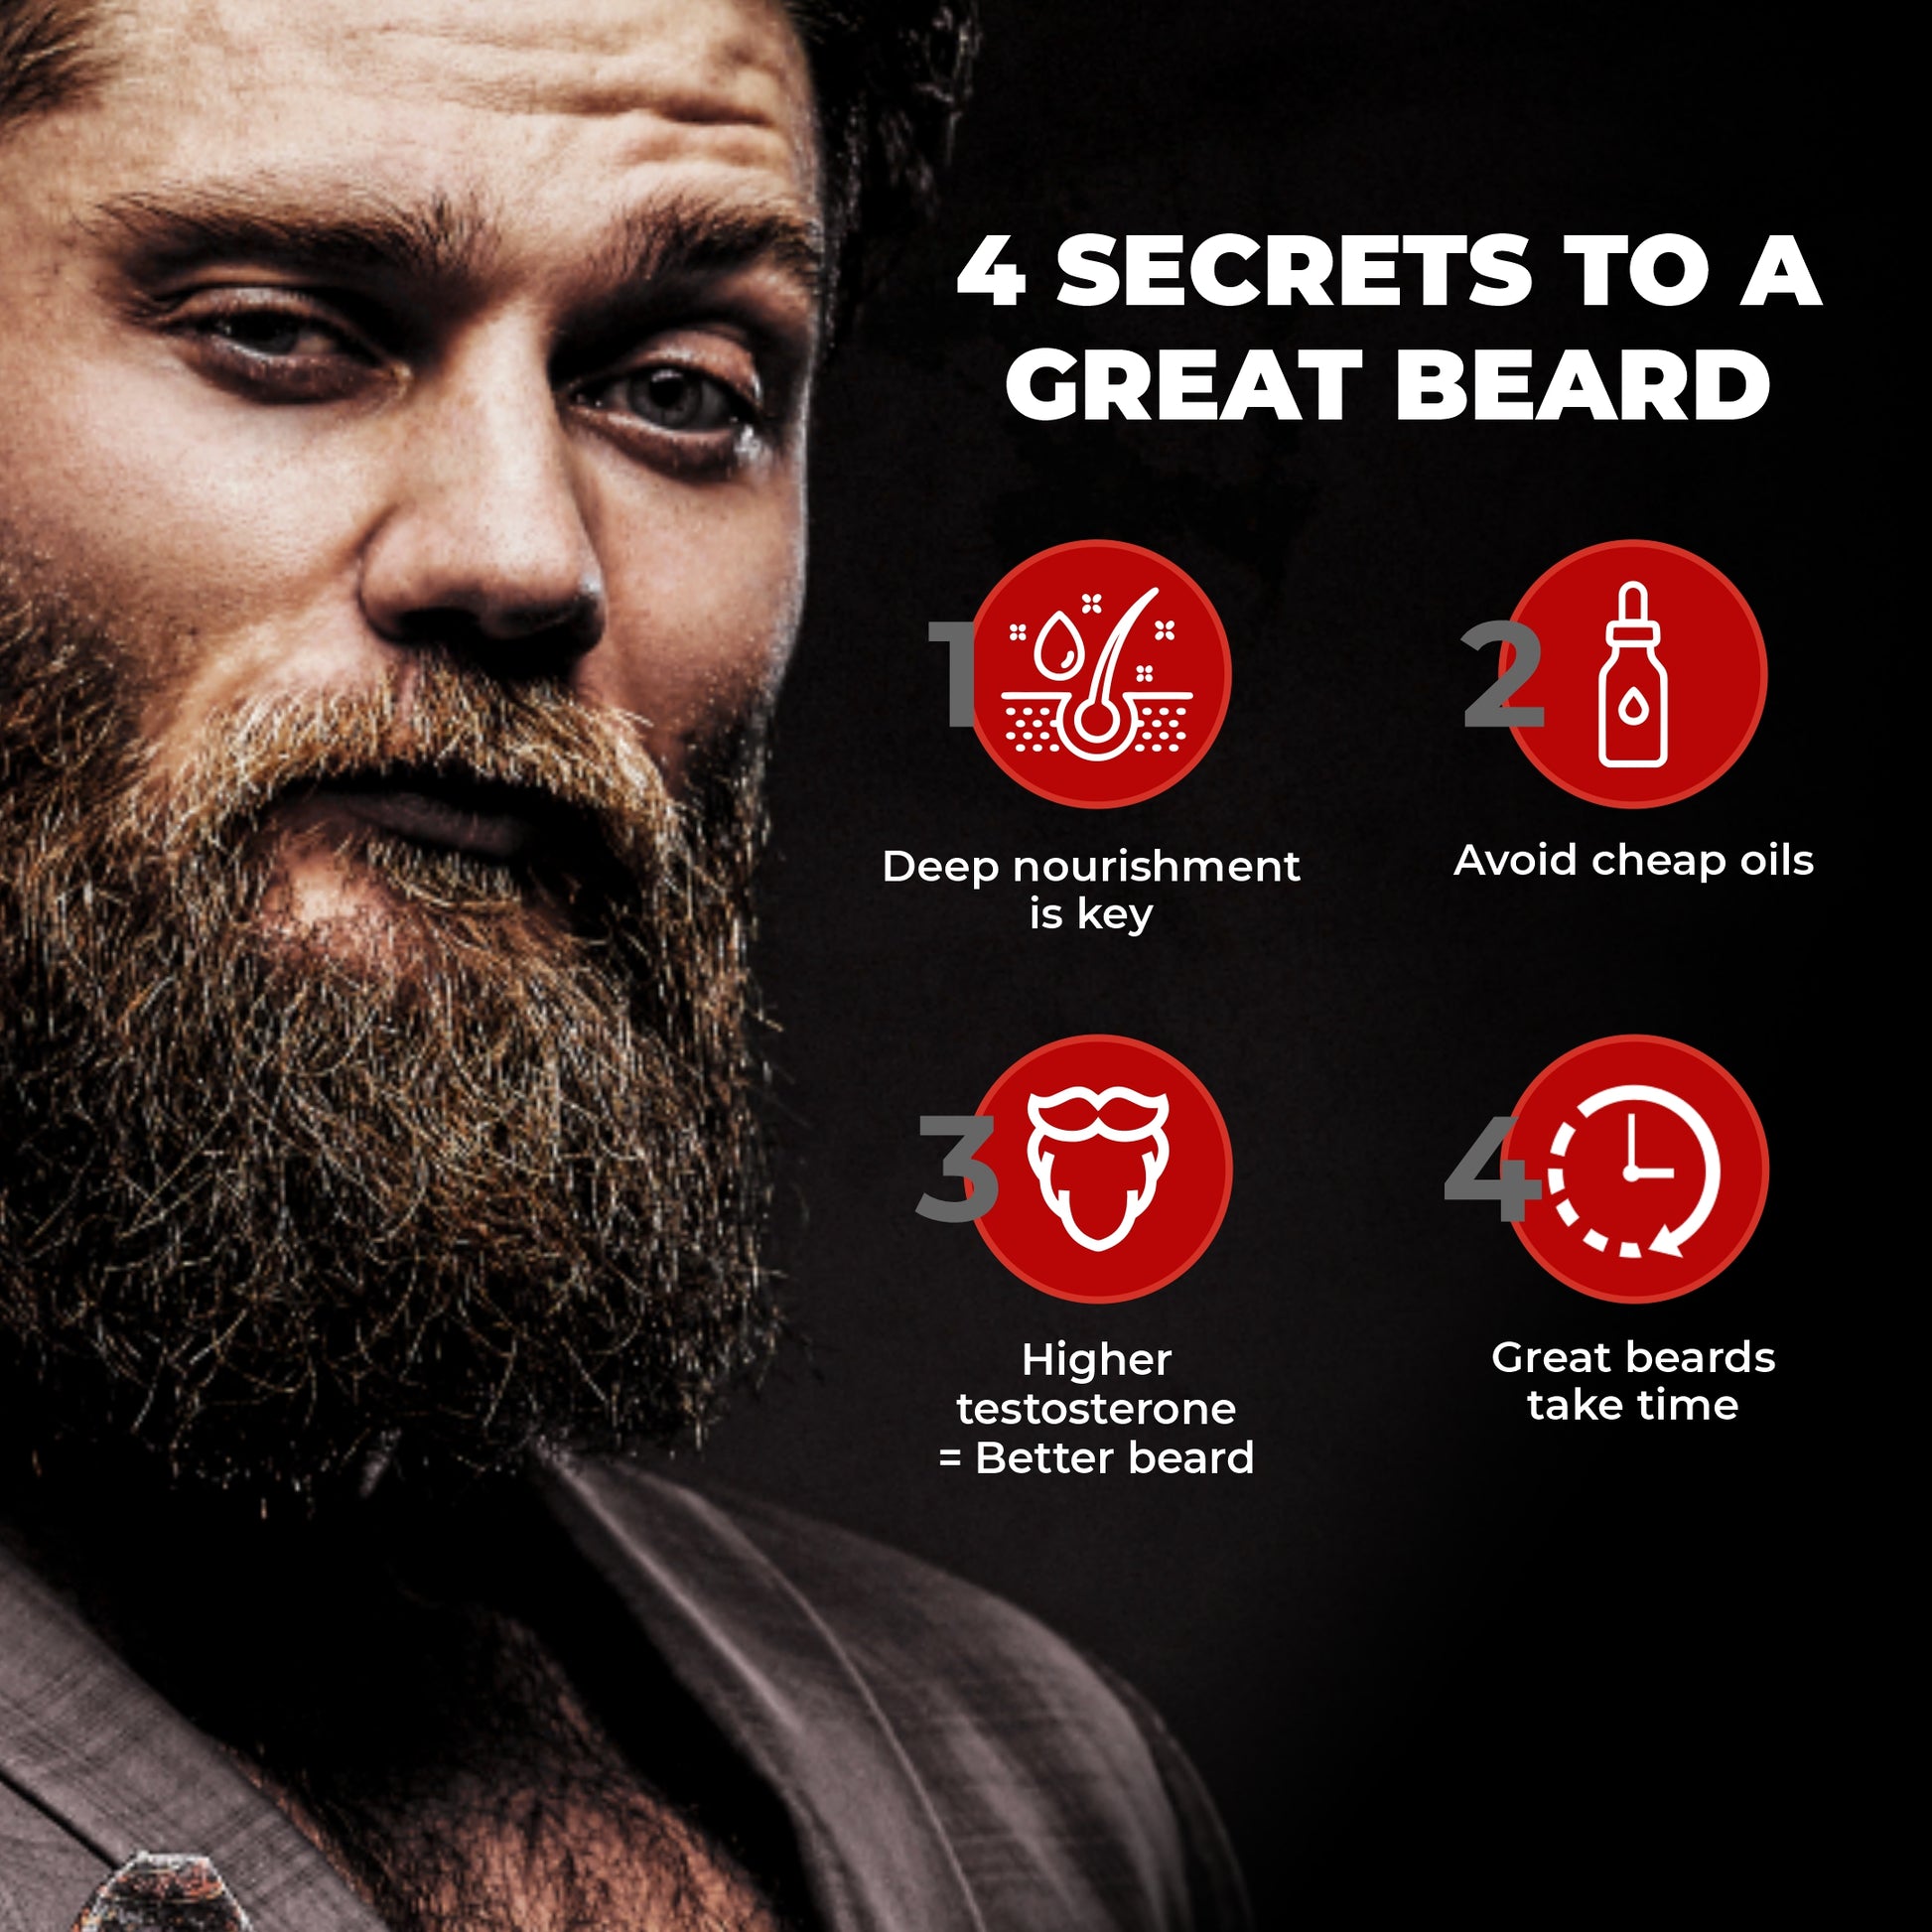 Which is best for beard growth?, 4 secrets to a great beard